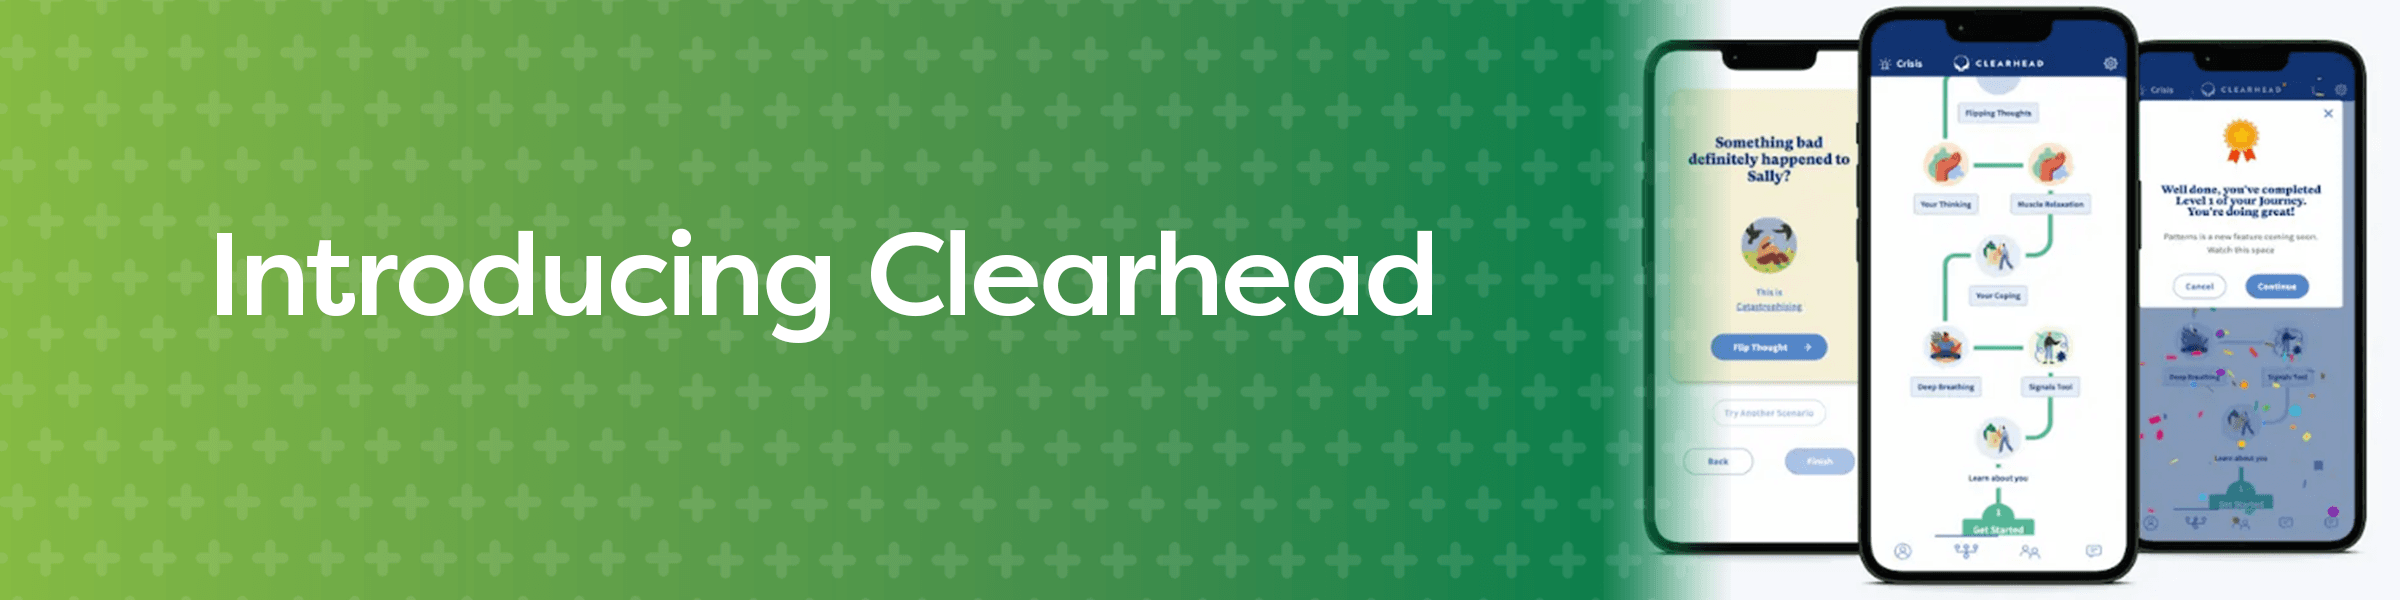 introducing clearhead